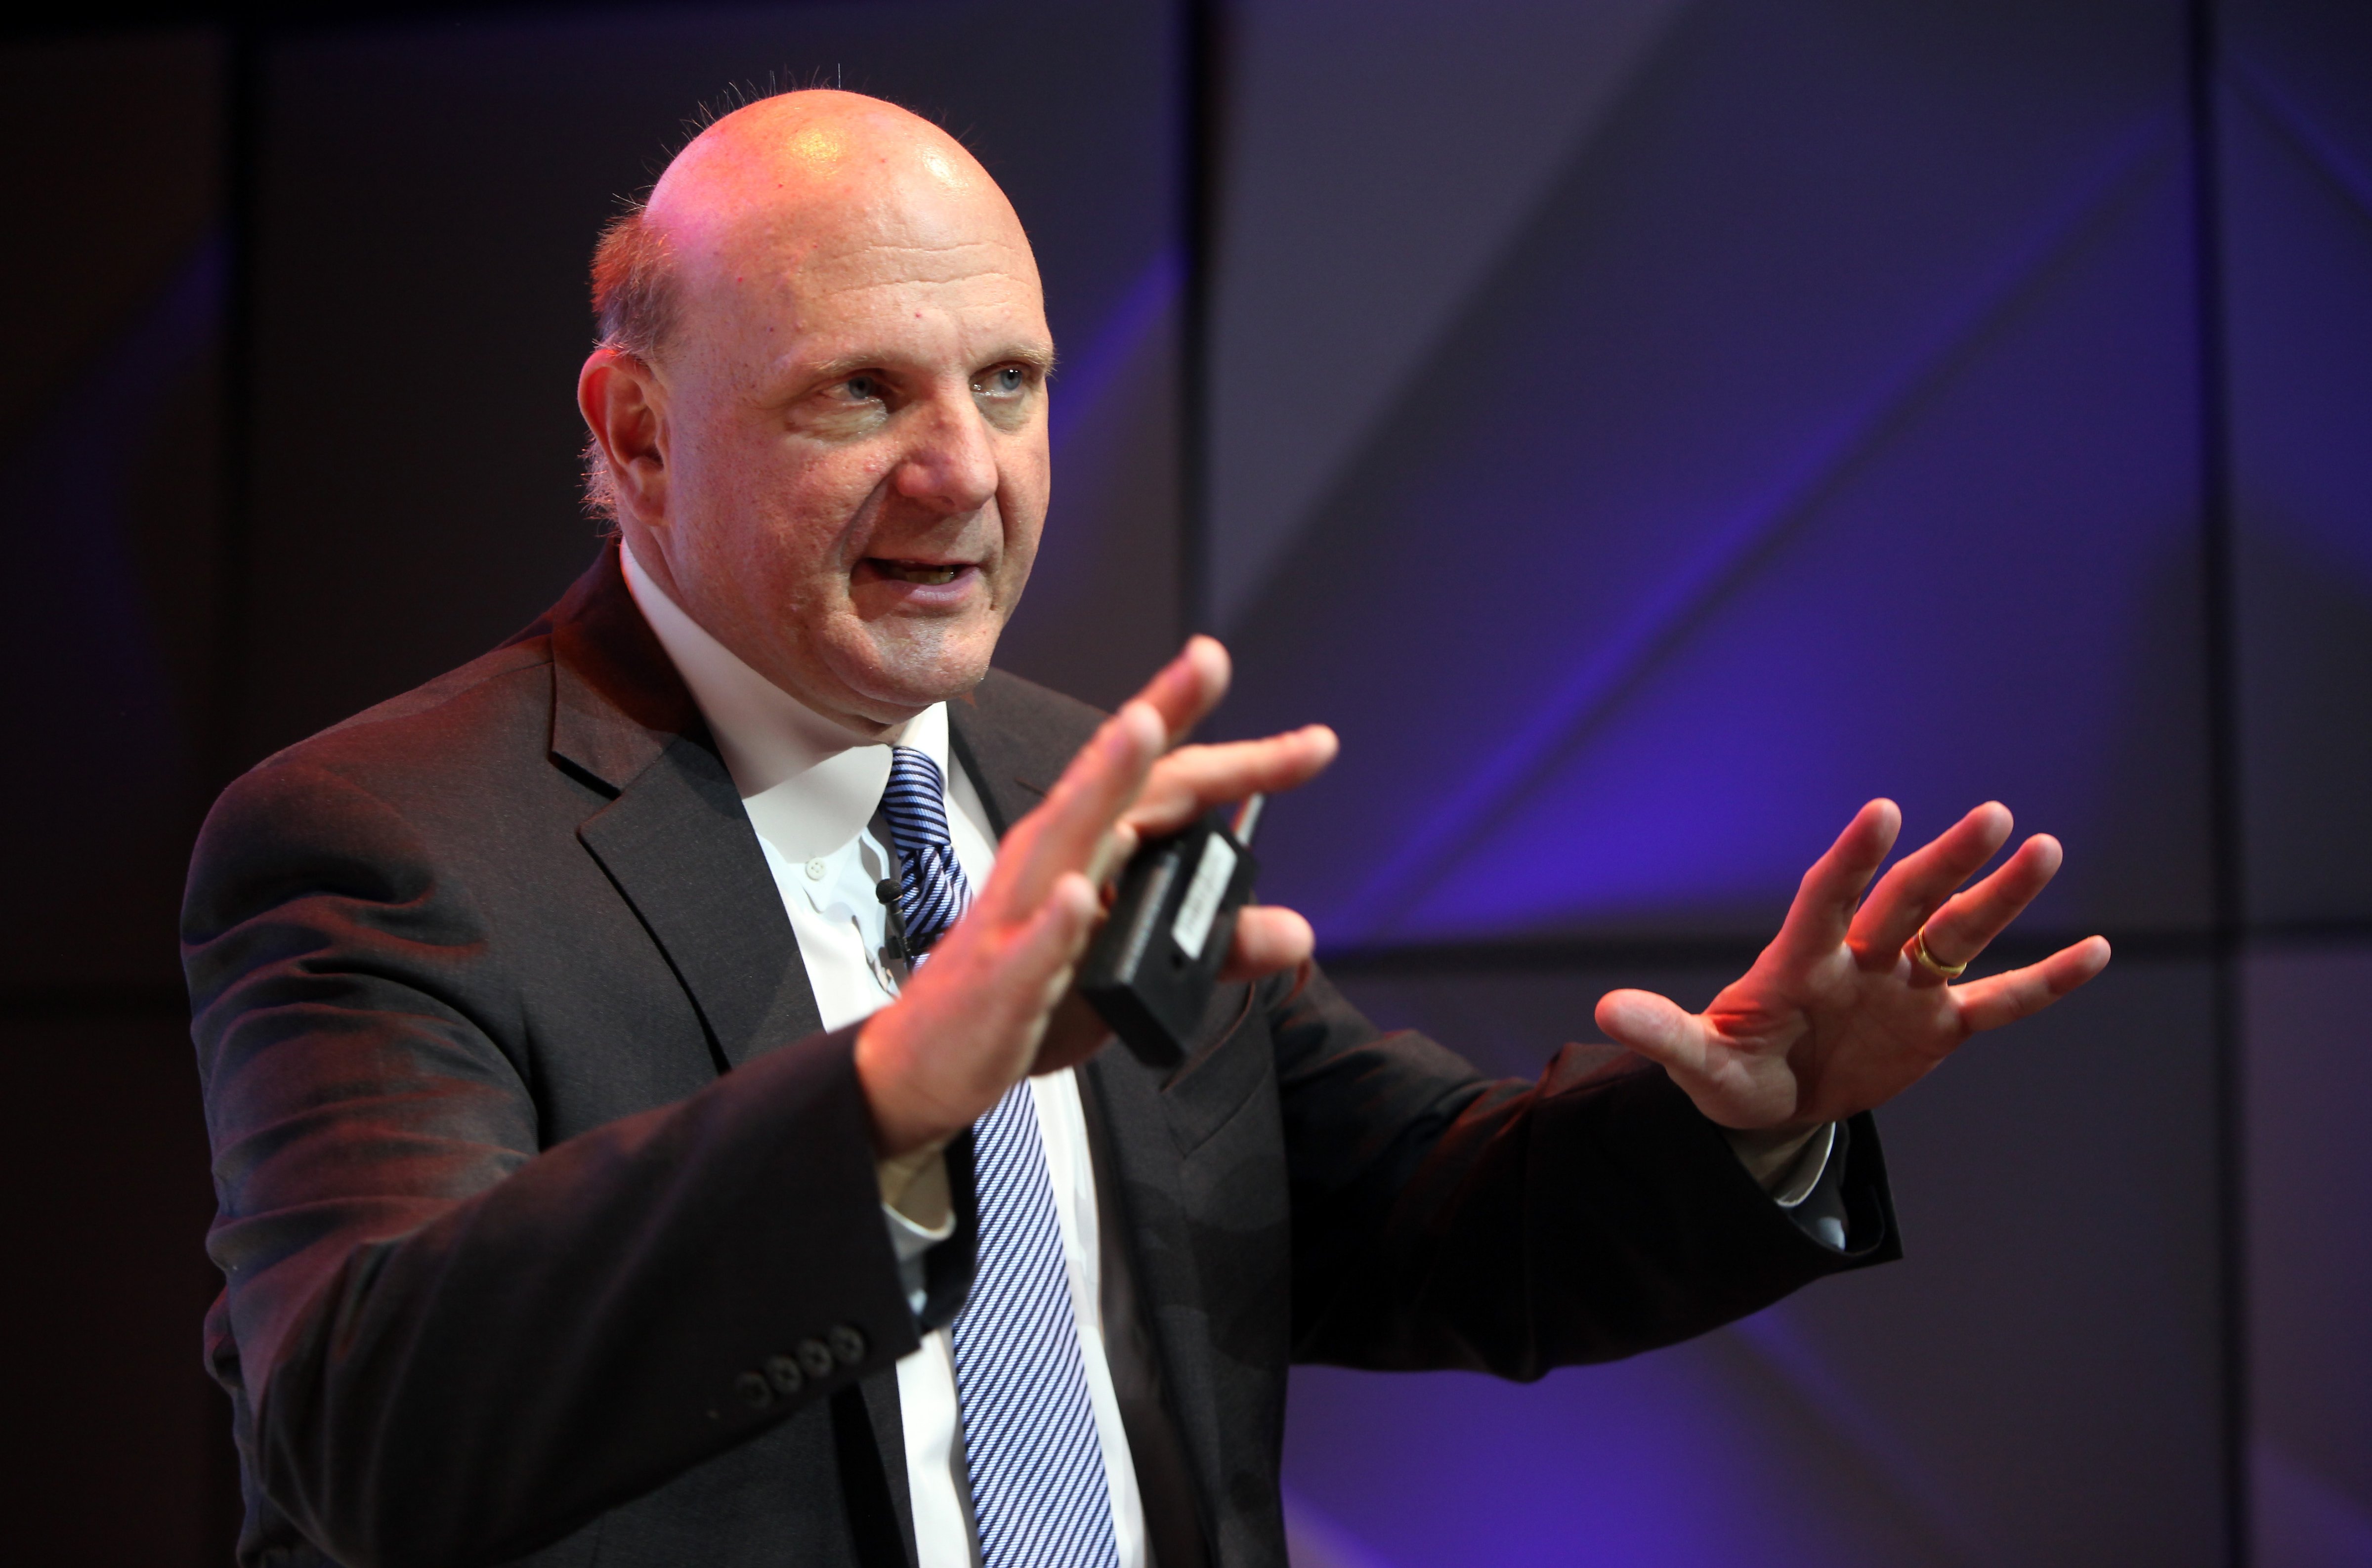 Microsoft Chief Executive Steve Ballmer speaks at the opening of the Microsoft Center Berlin on November 7, 2013 in Berlin, Germany. (Adam Berry—Getty Images)